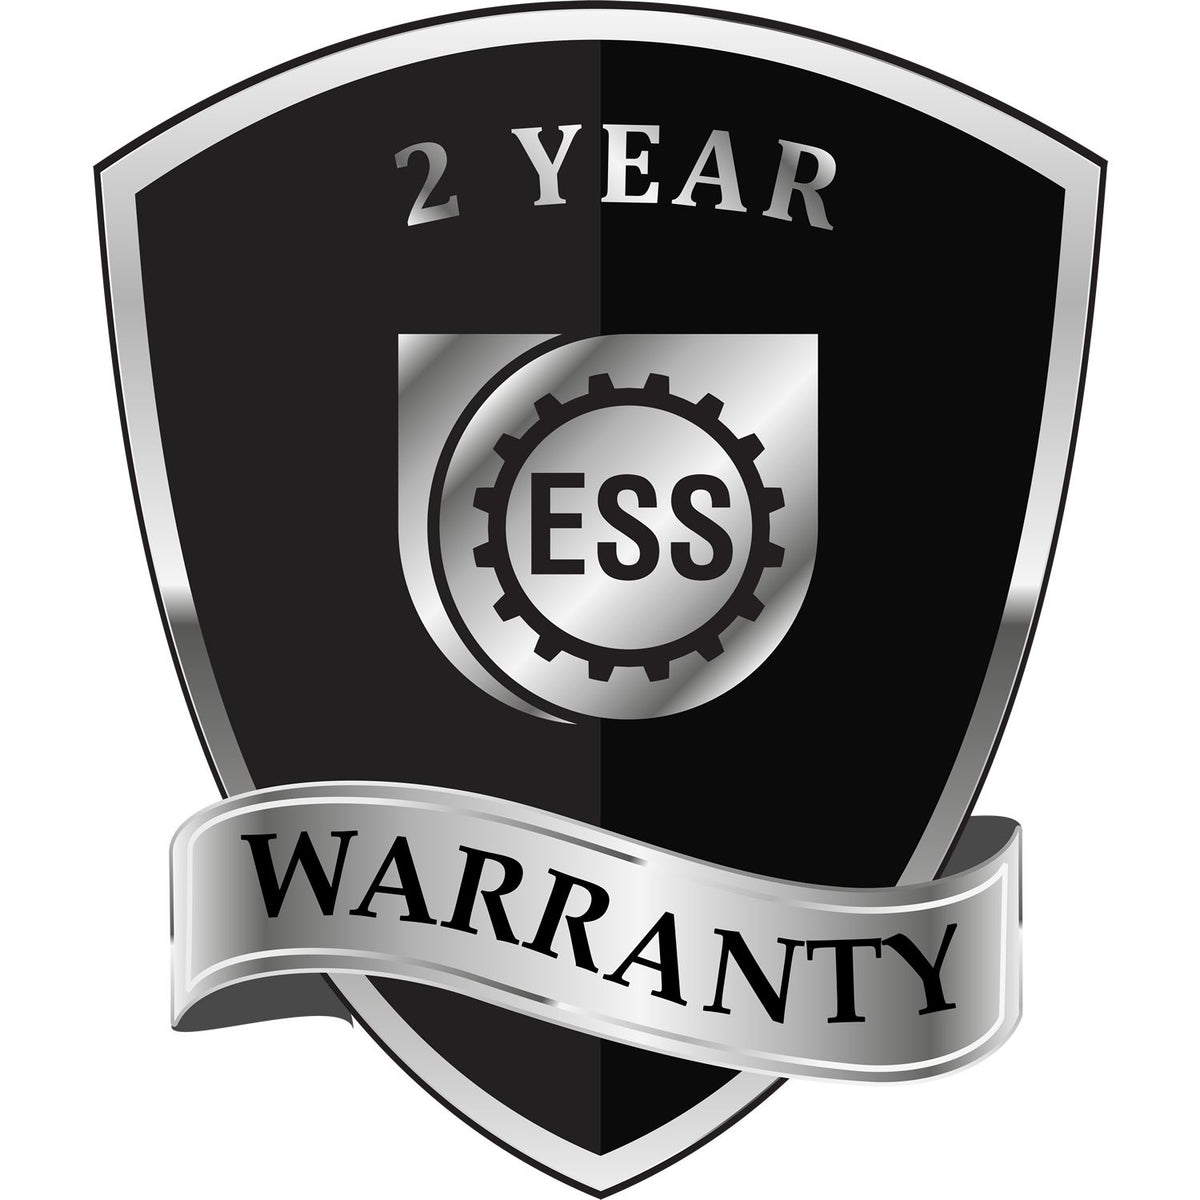 A black and silver badge or emblem showing warranty information for the Gift Vermont Land Surveyor Seal